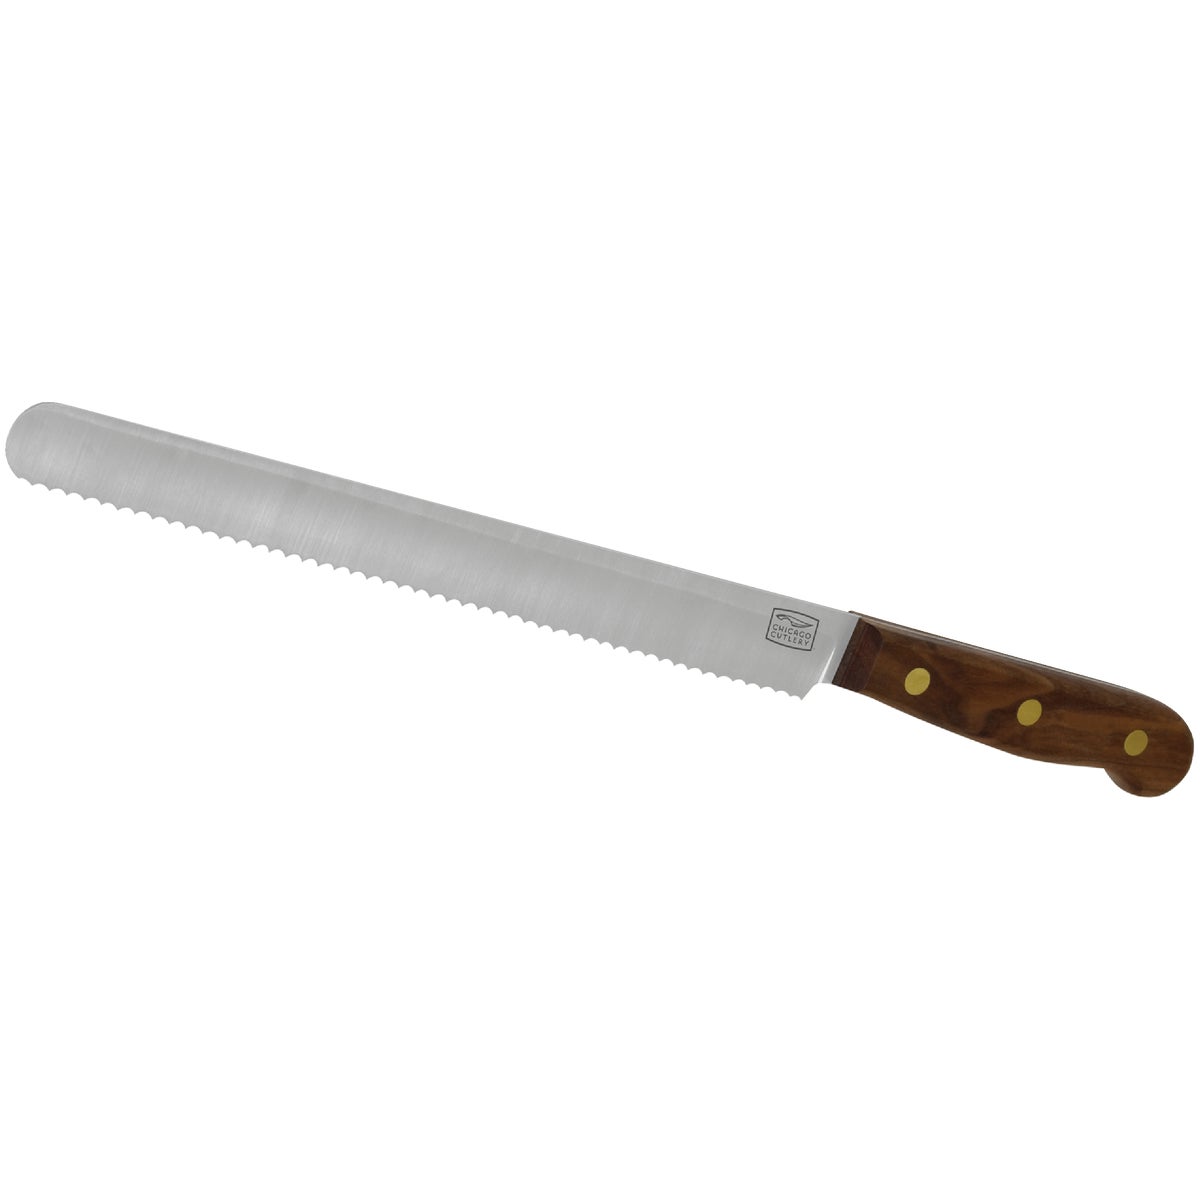 Item 604305, Features: 10" High-carbon stainless steel blade with Taper Grind edge.